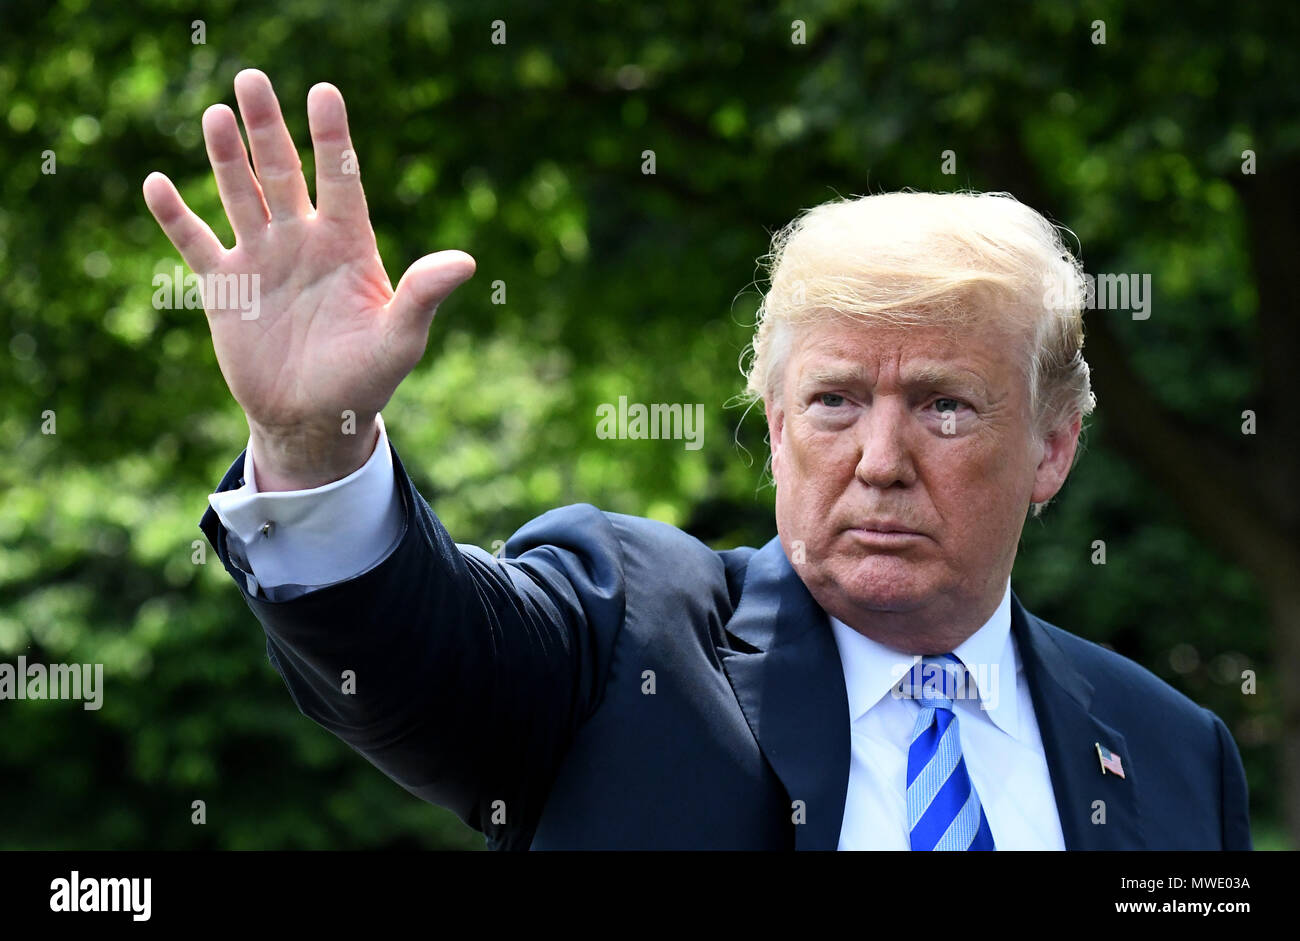 US President Donald Trump speaks to the press after meeting with Kim Yong Chol, former North Korean military intelligence chief and one of leader Kim Jong Un's closest aides, on the South Lawn of the White House in Washington on Friday, June 1, 2018. Credit: Olivier Douliery/Pool via CNP | usage worldwide Stock Photo